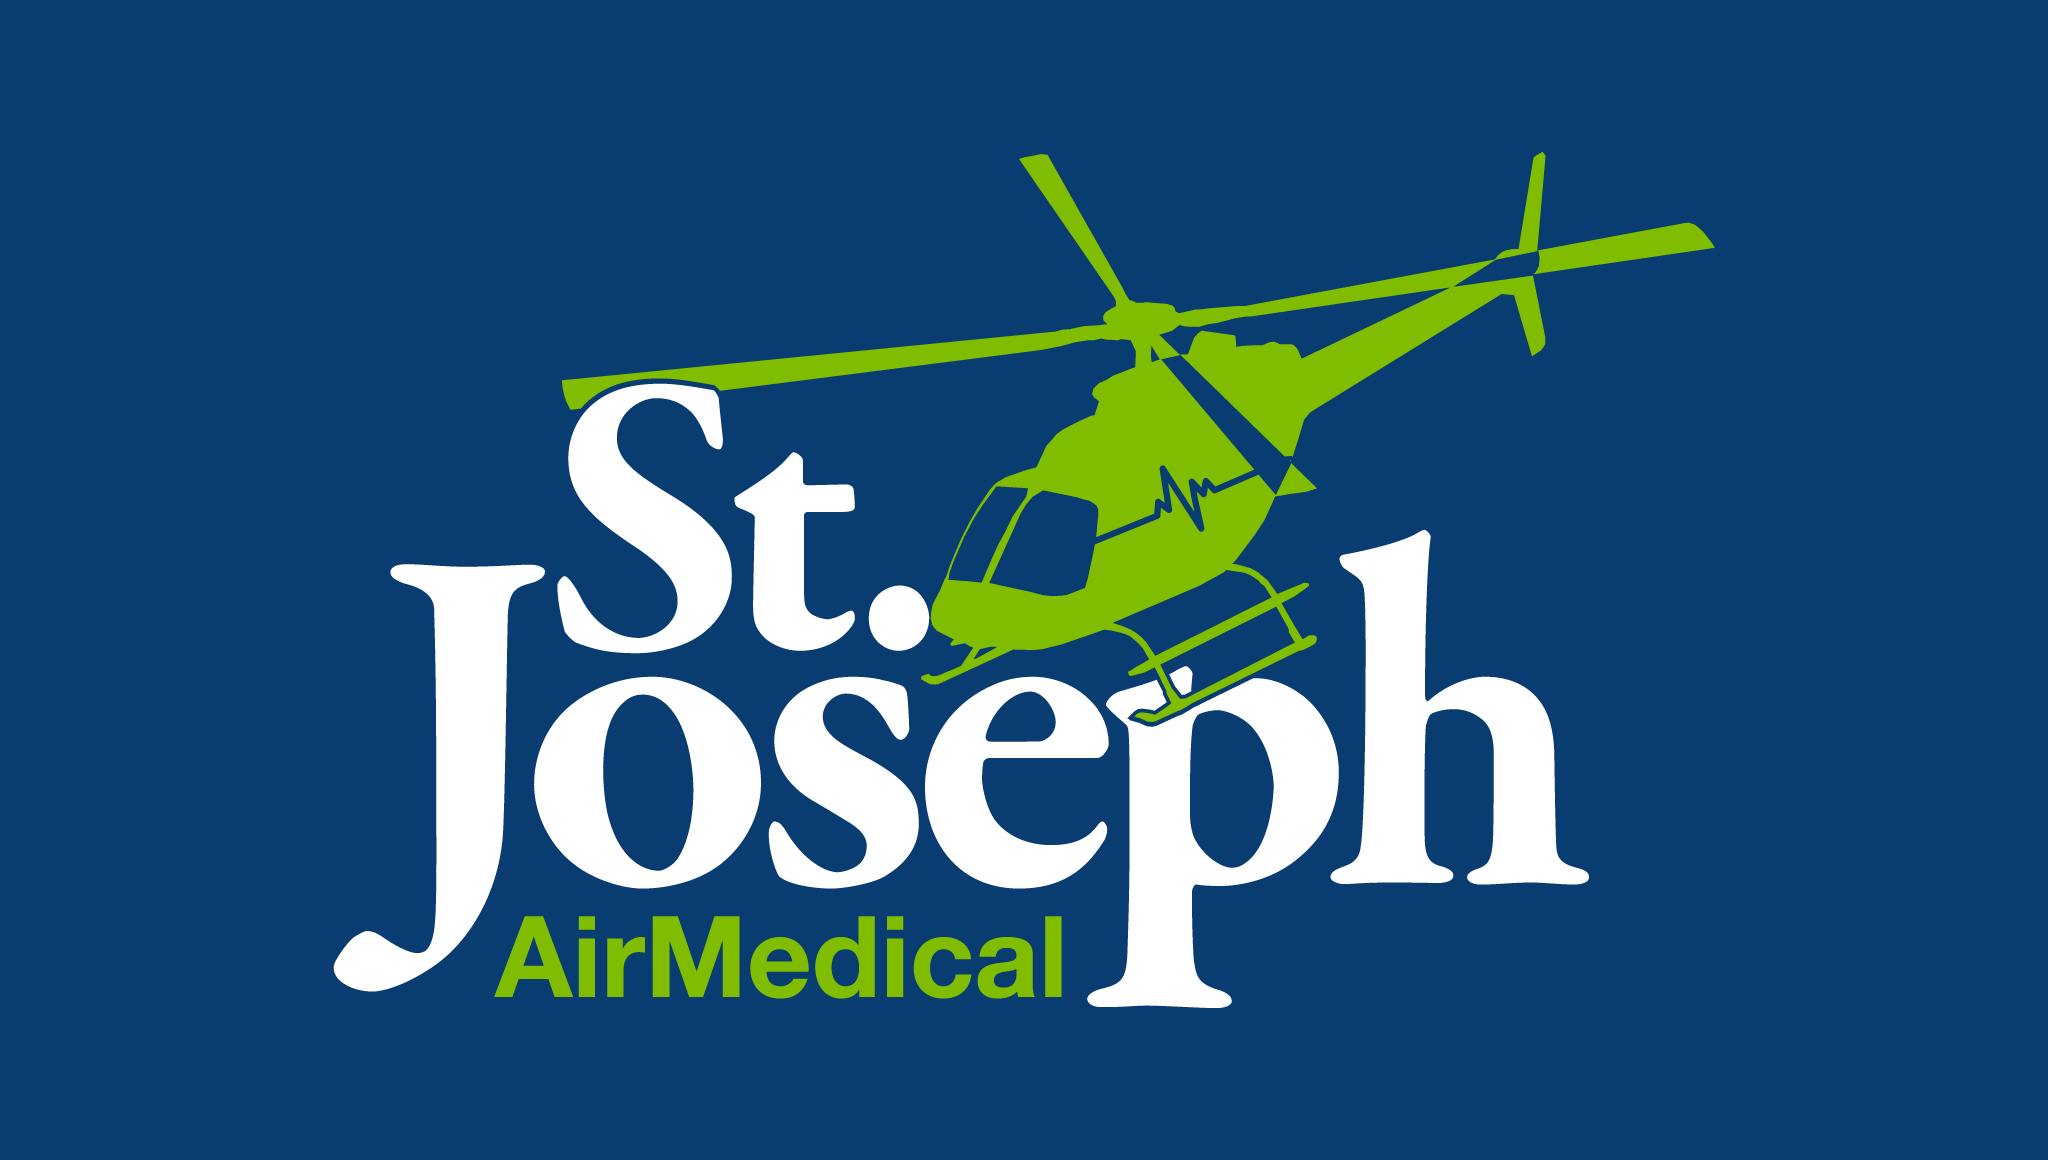  Logo Design With Image and Tagline for Hospital 